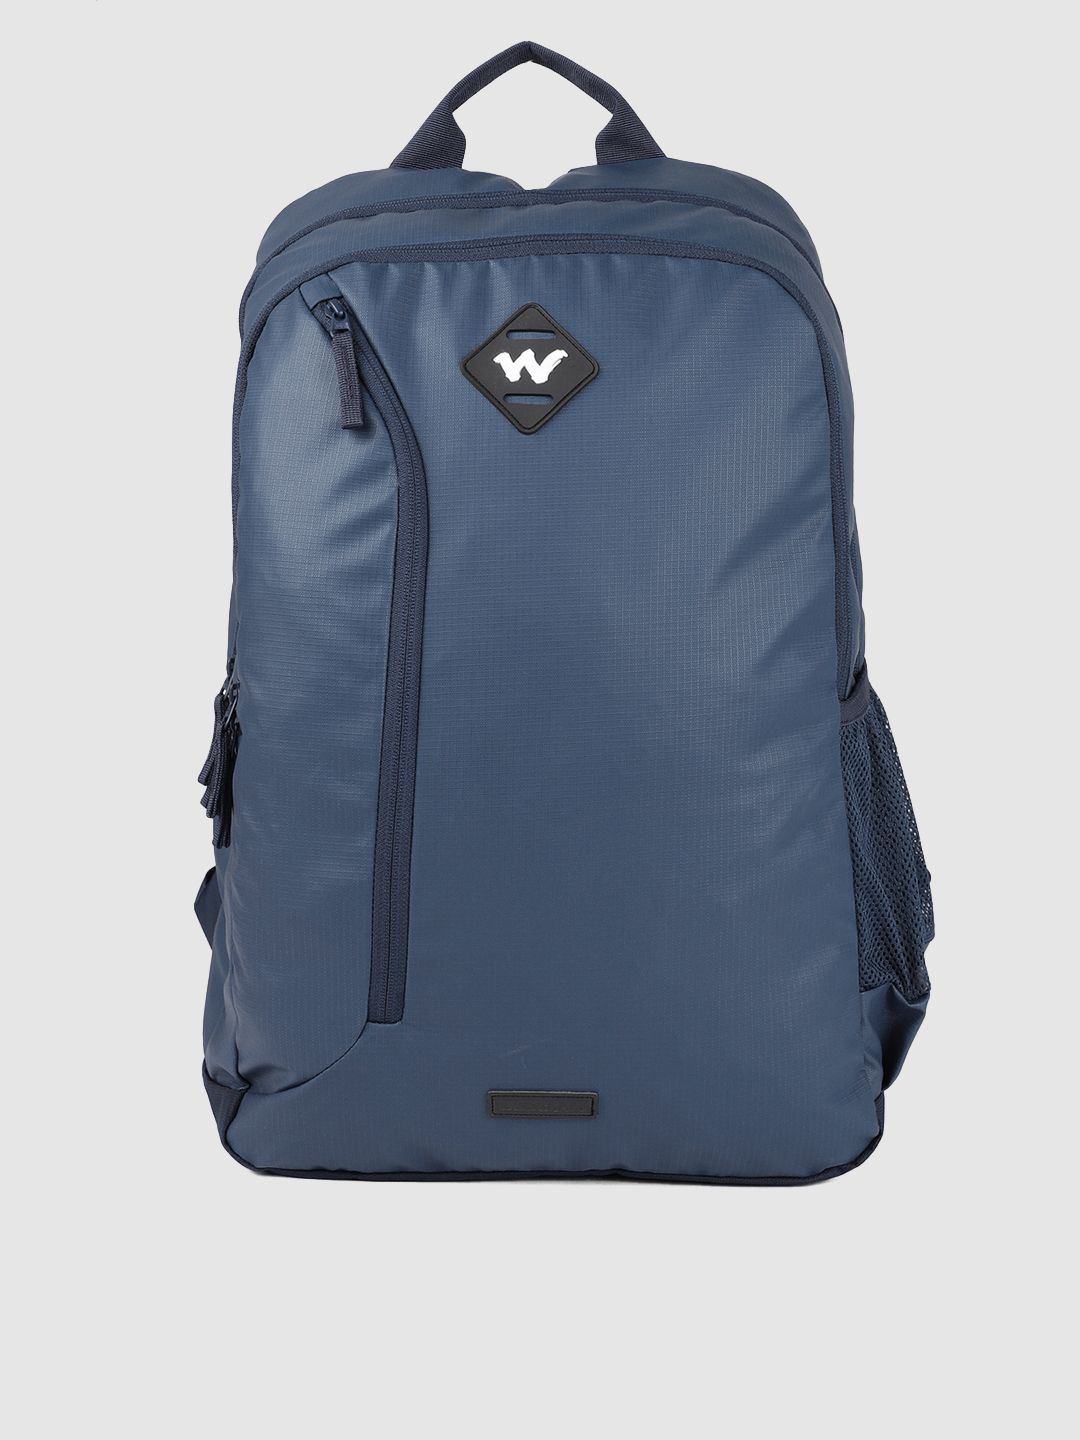 Wildcraft Unisex Blue Solid Corpro 1.0 Plus Coated Backpack Price in India